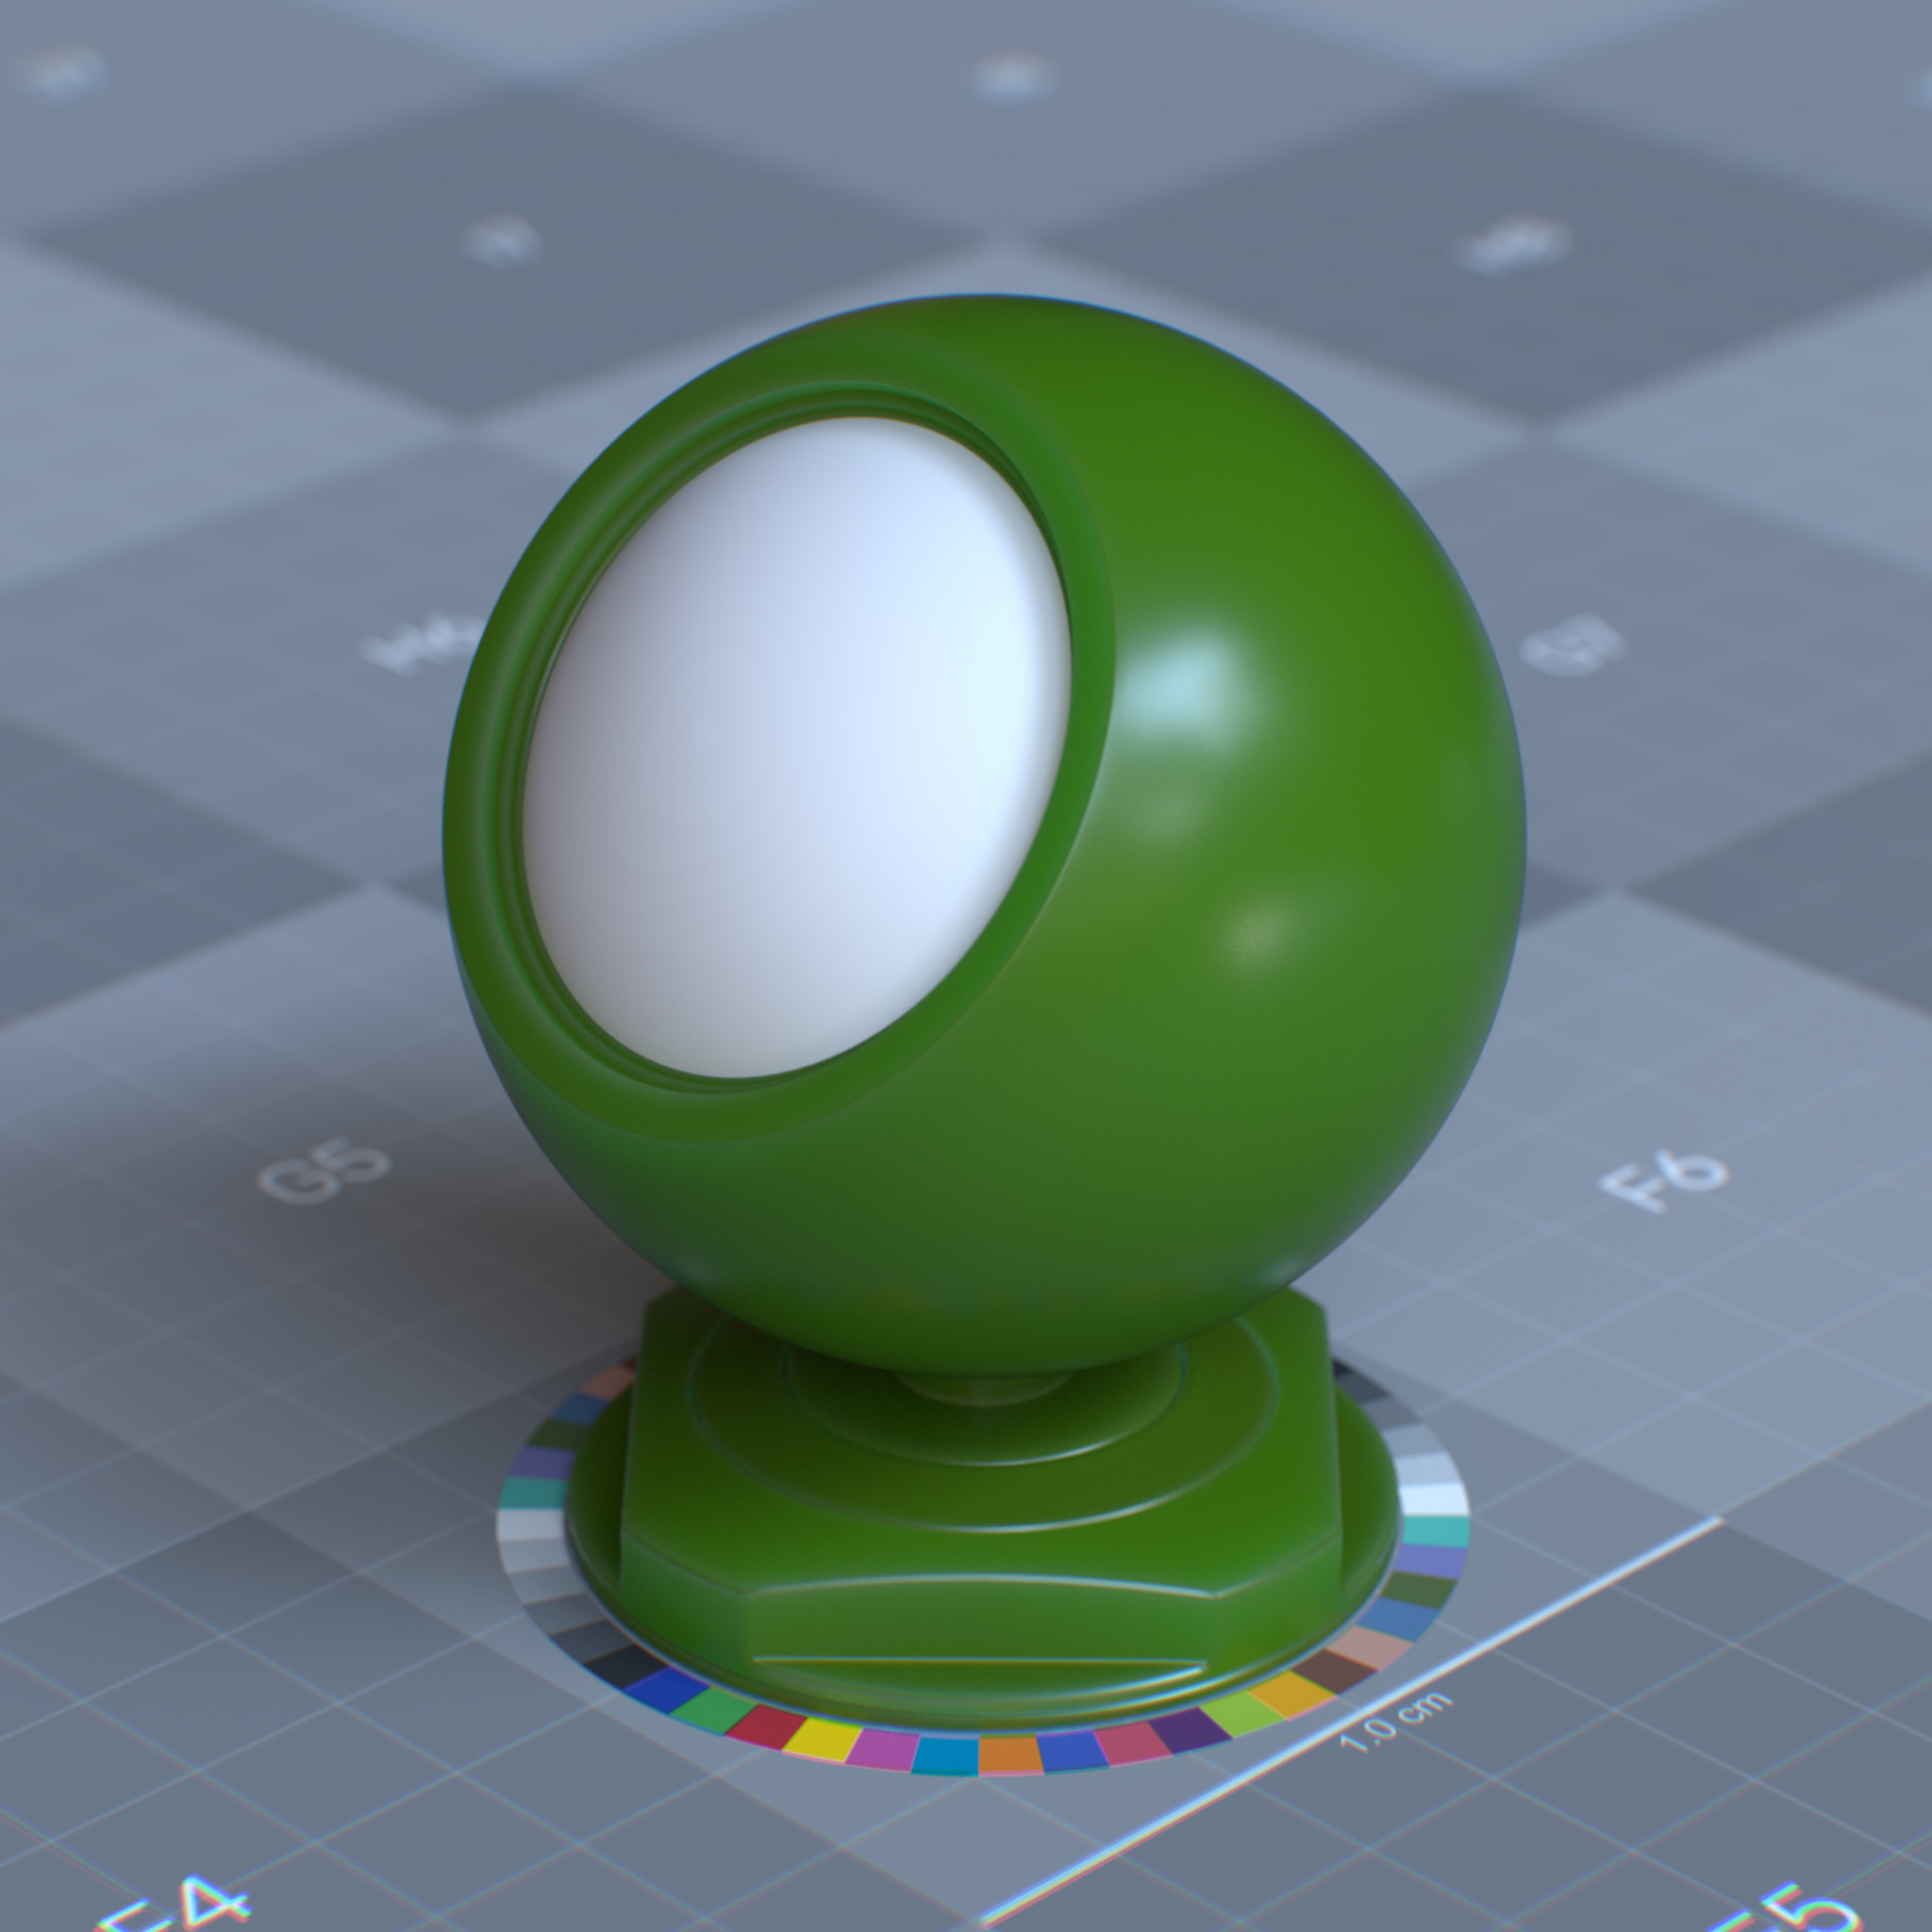 rtx_material_omnisurfacebase_specular_reflection_roughness_0p25